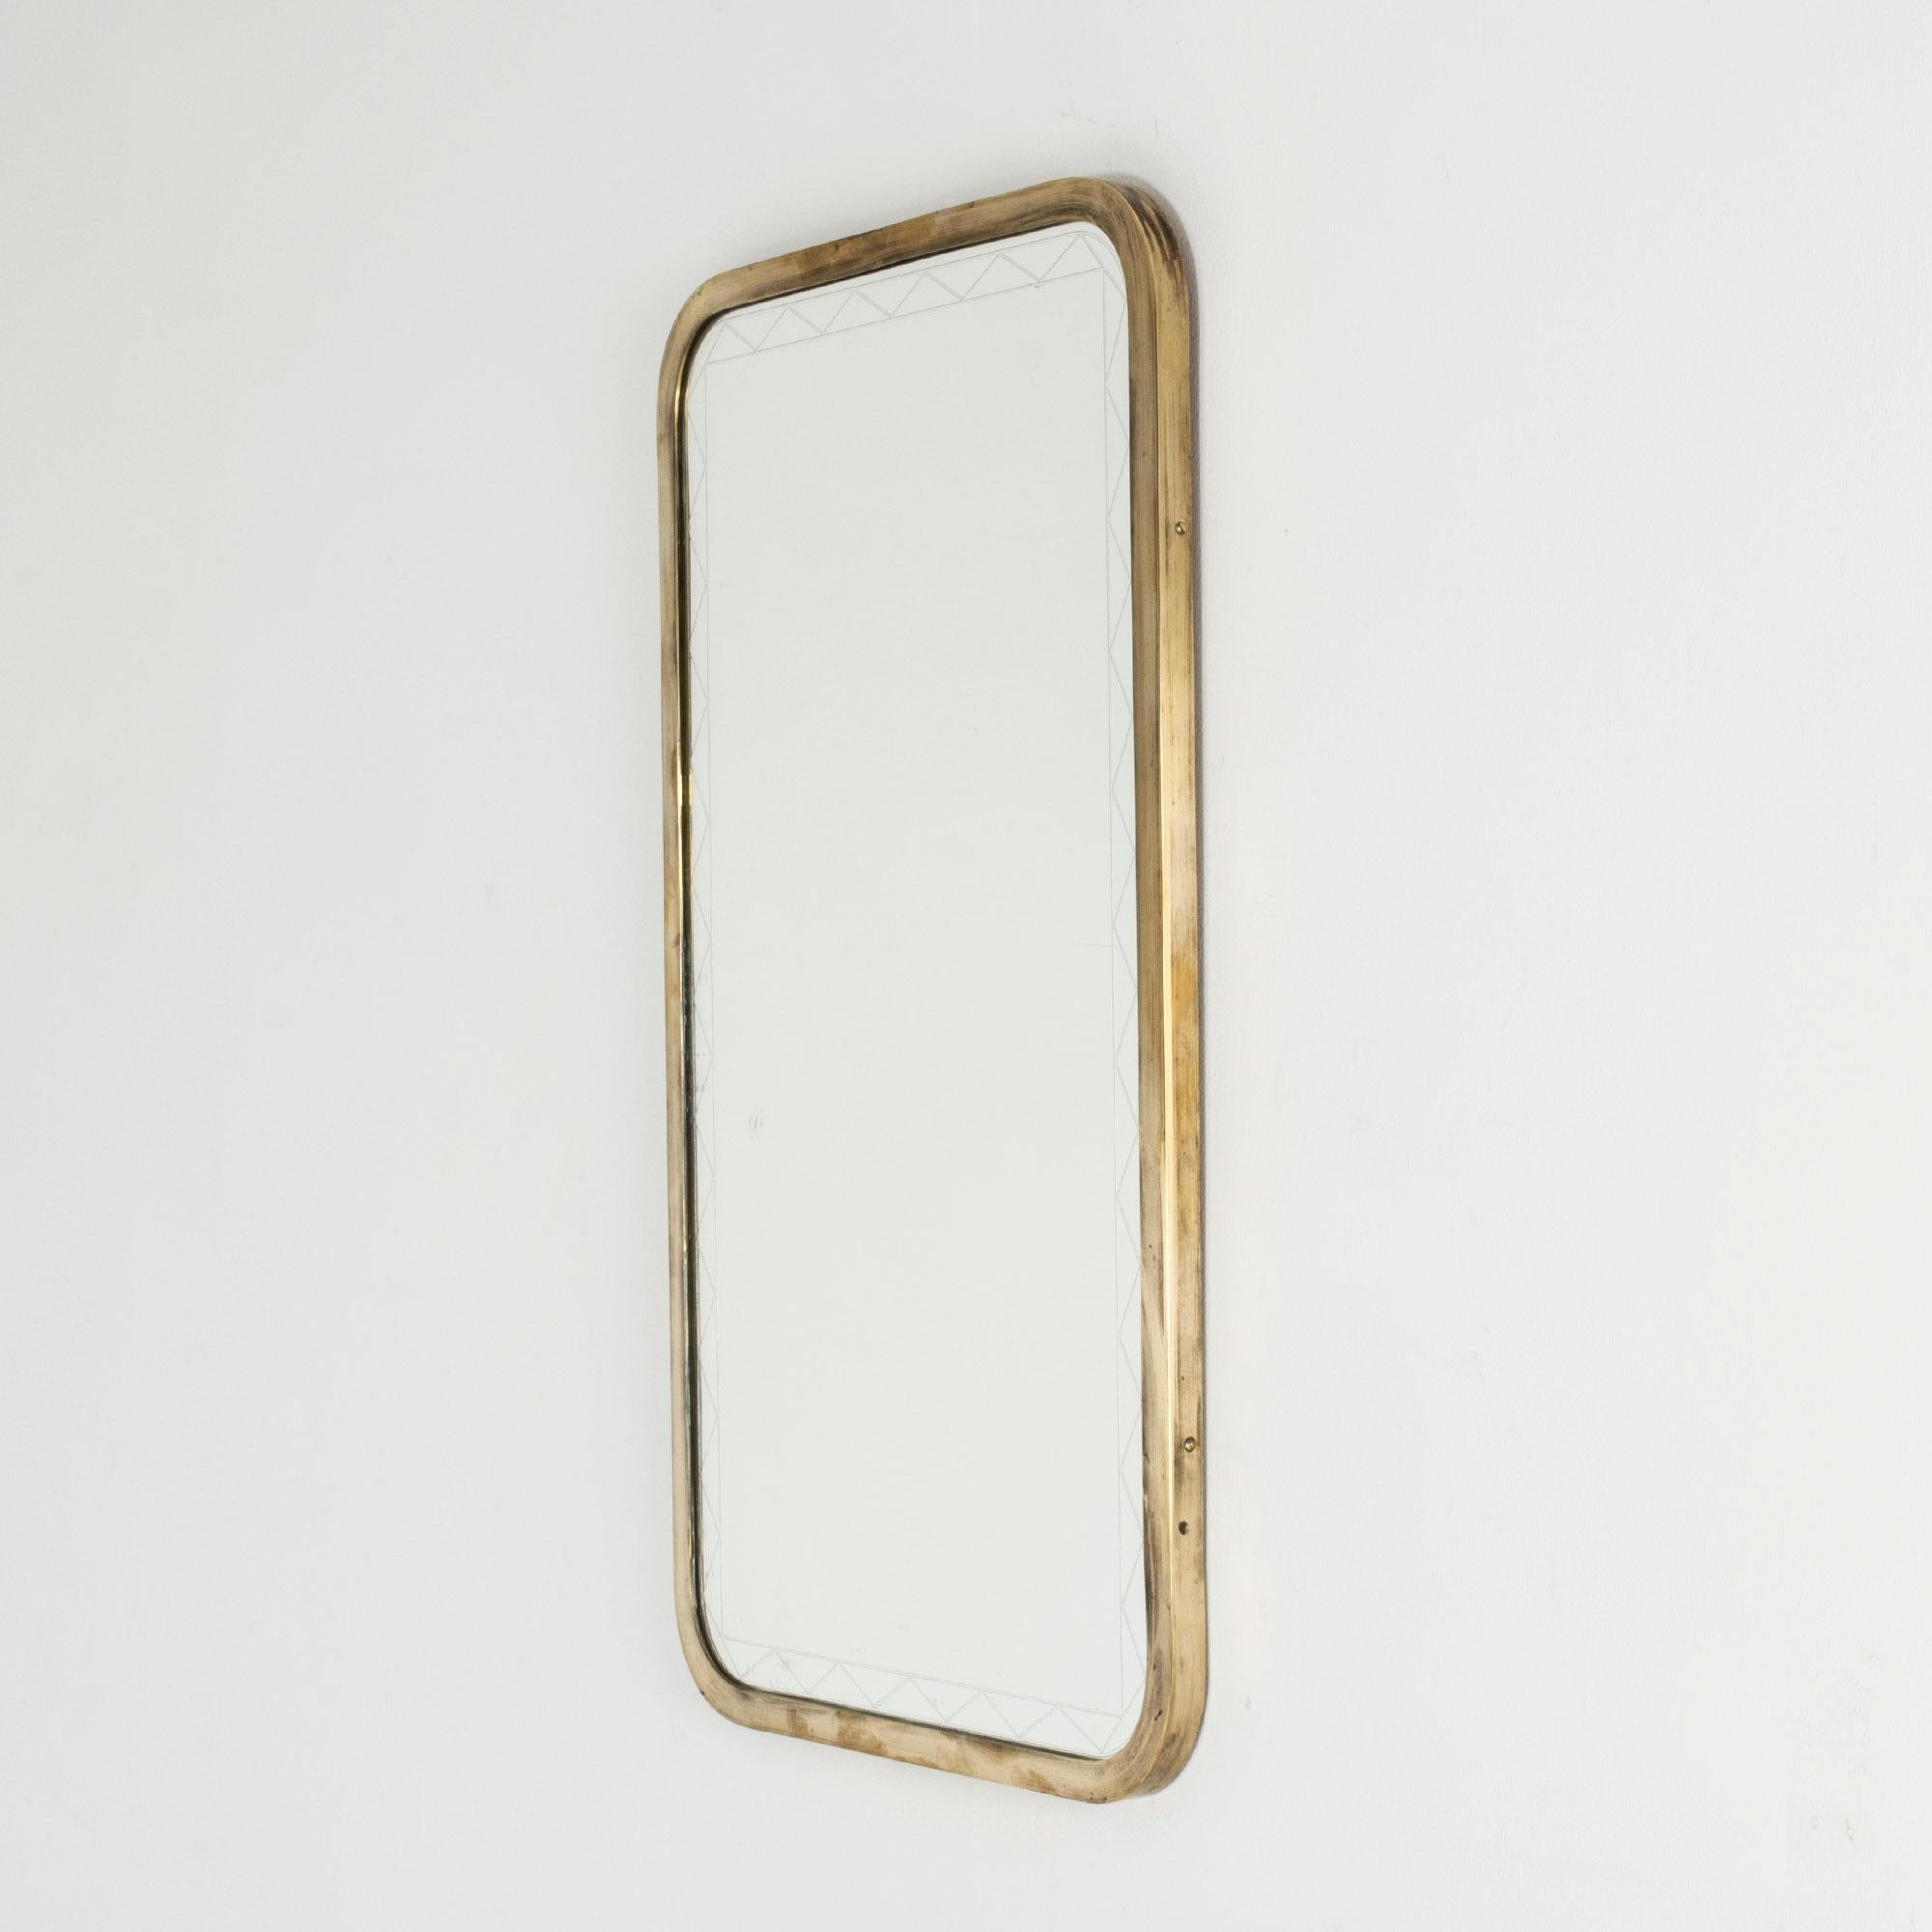 Beautiful Swedish 1950s wall mirror with a brass frame with rounded corners. Graphic pattern etched into the glass around the frame.